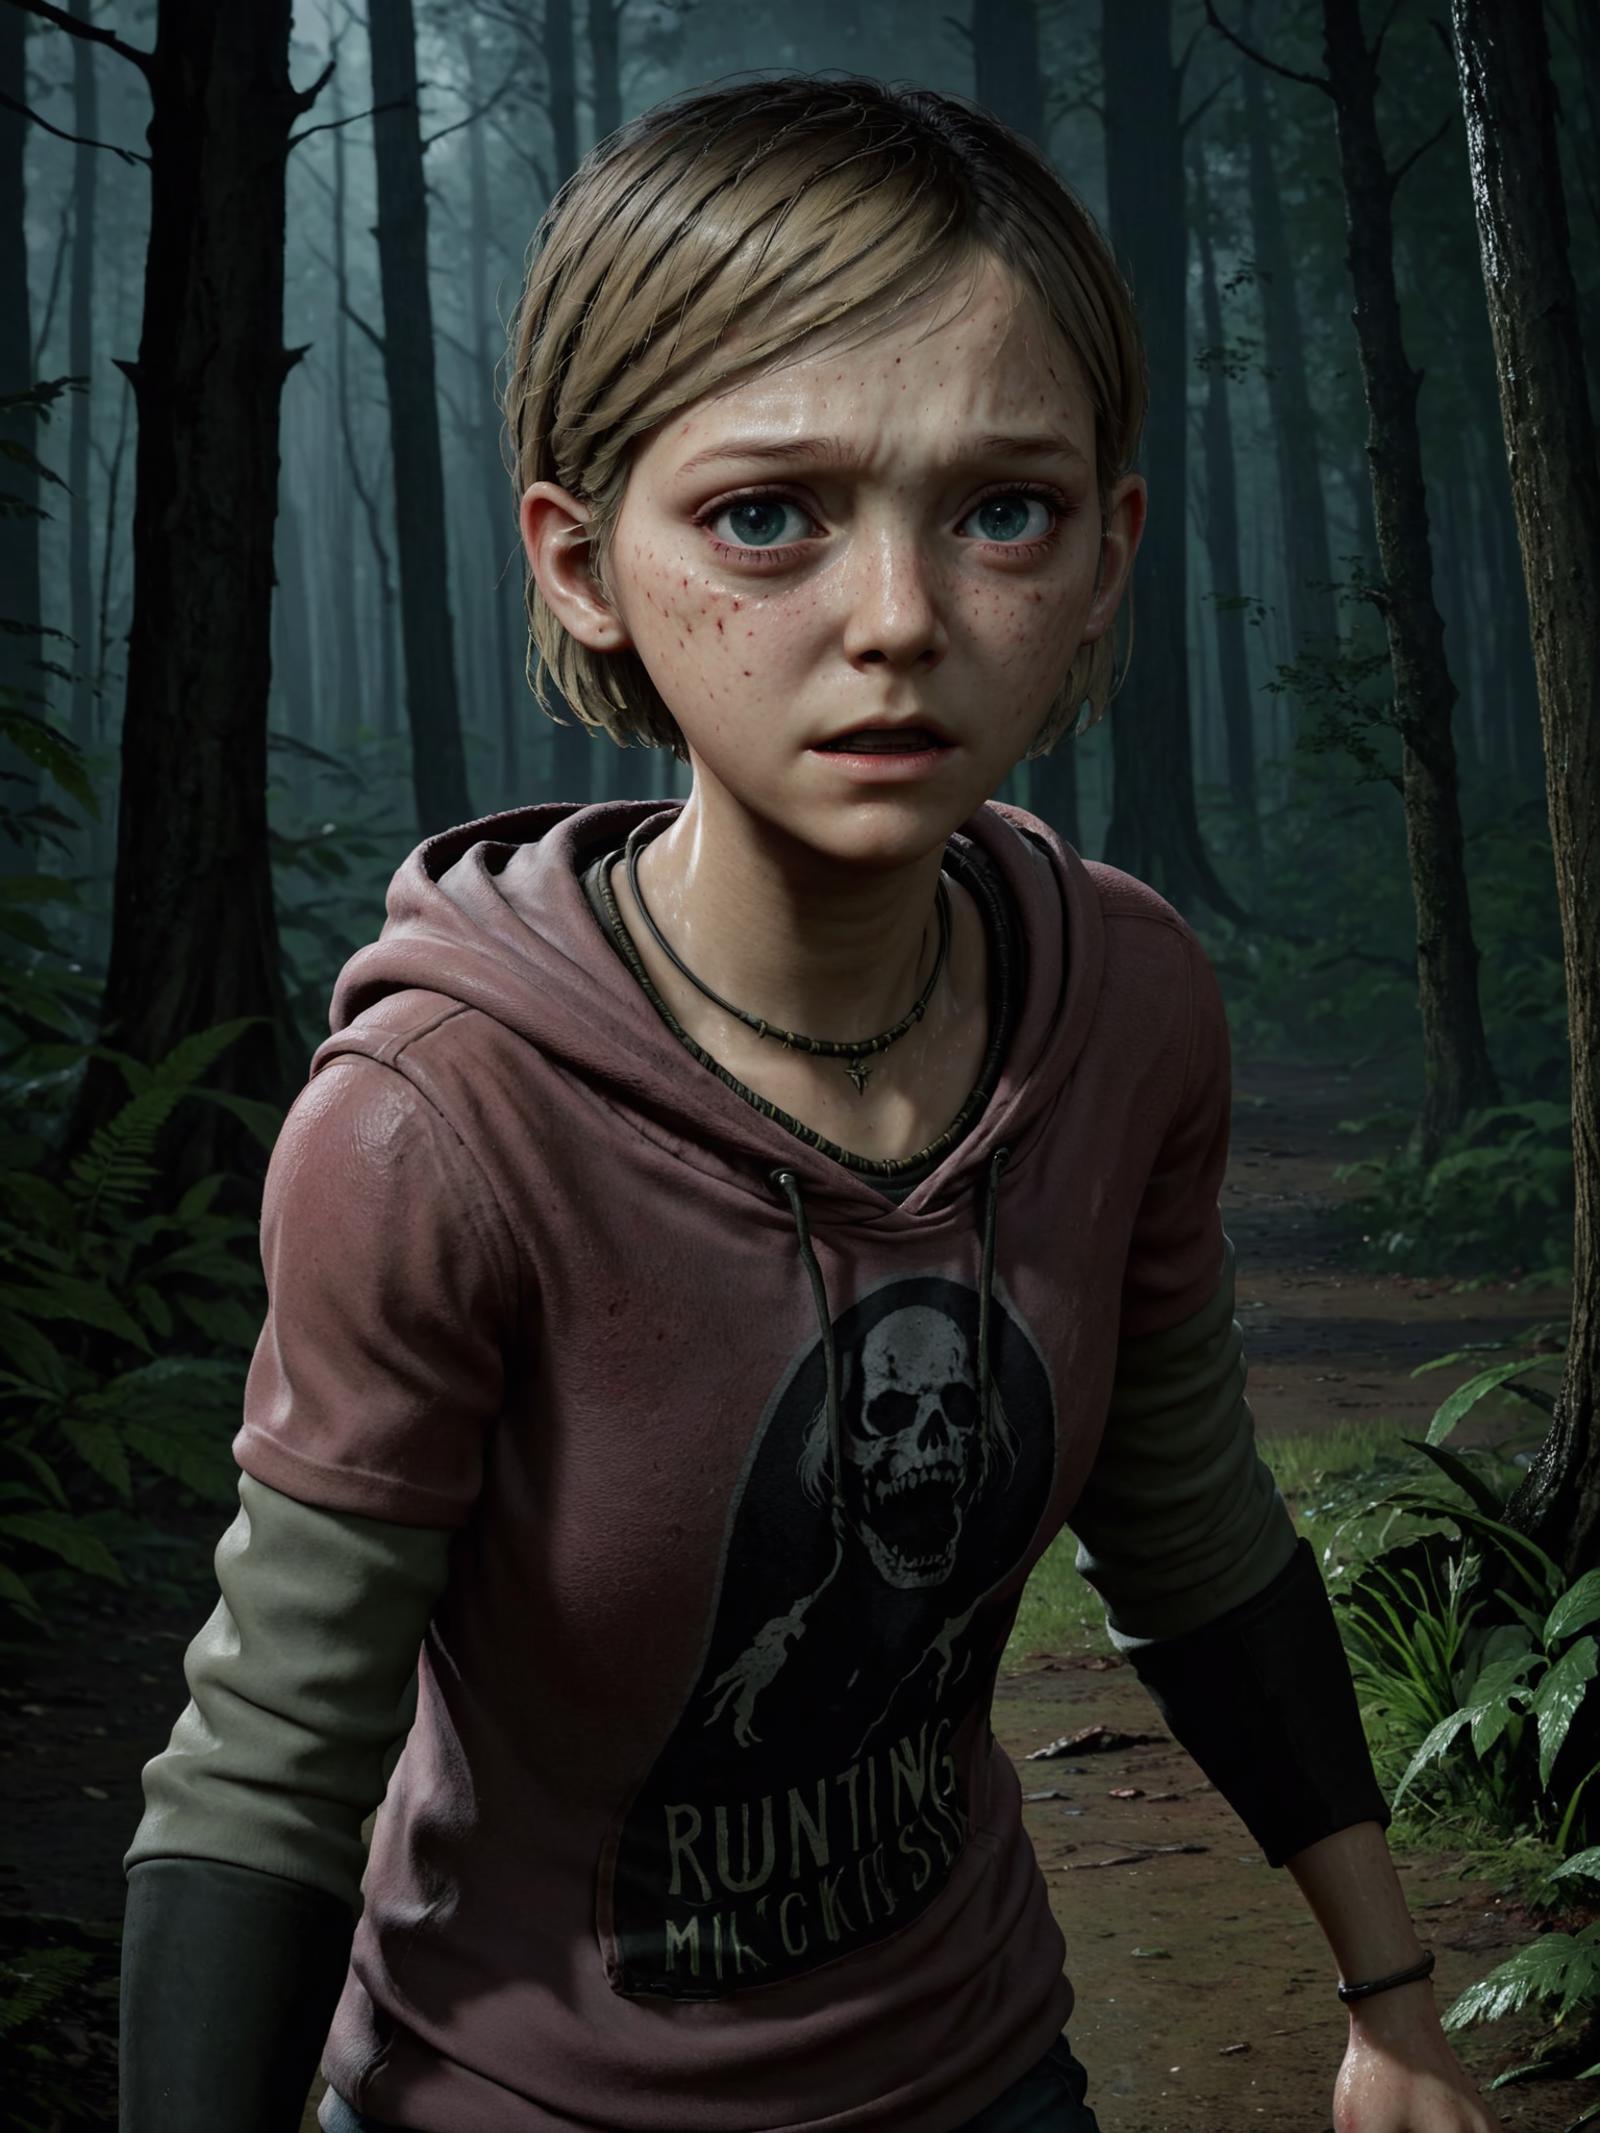 Sarah Miller - The Last of Us image by wwwcivitaicom